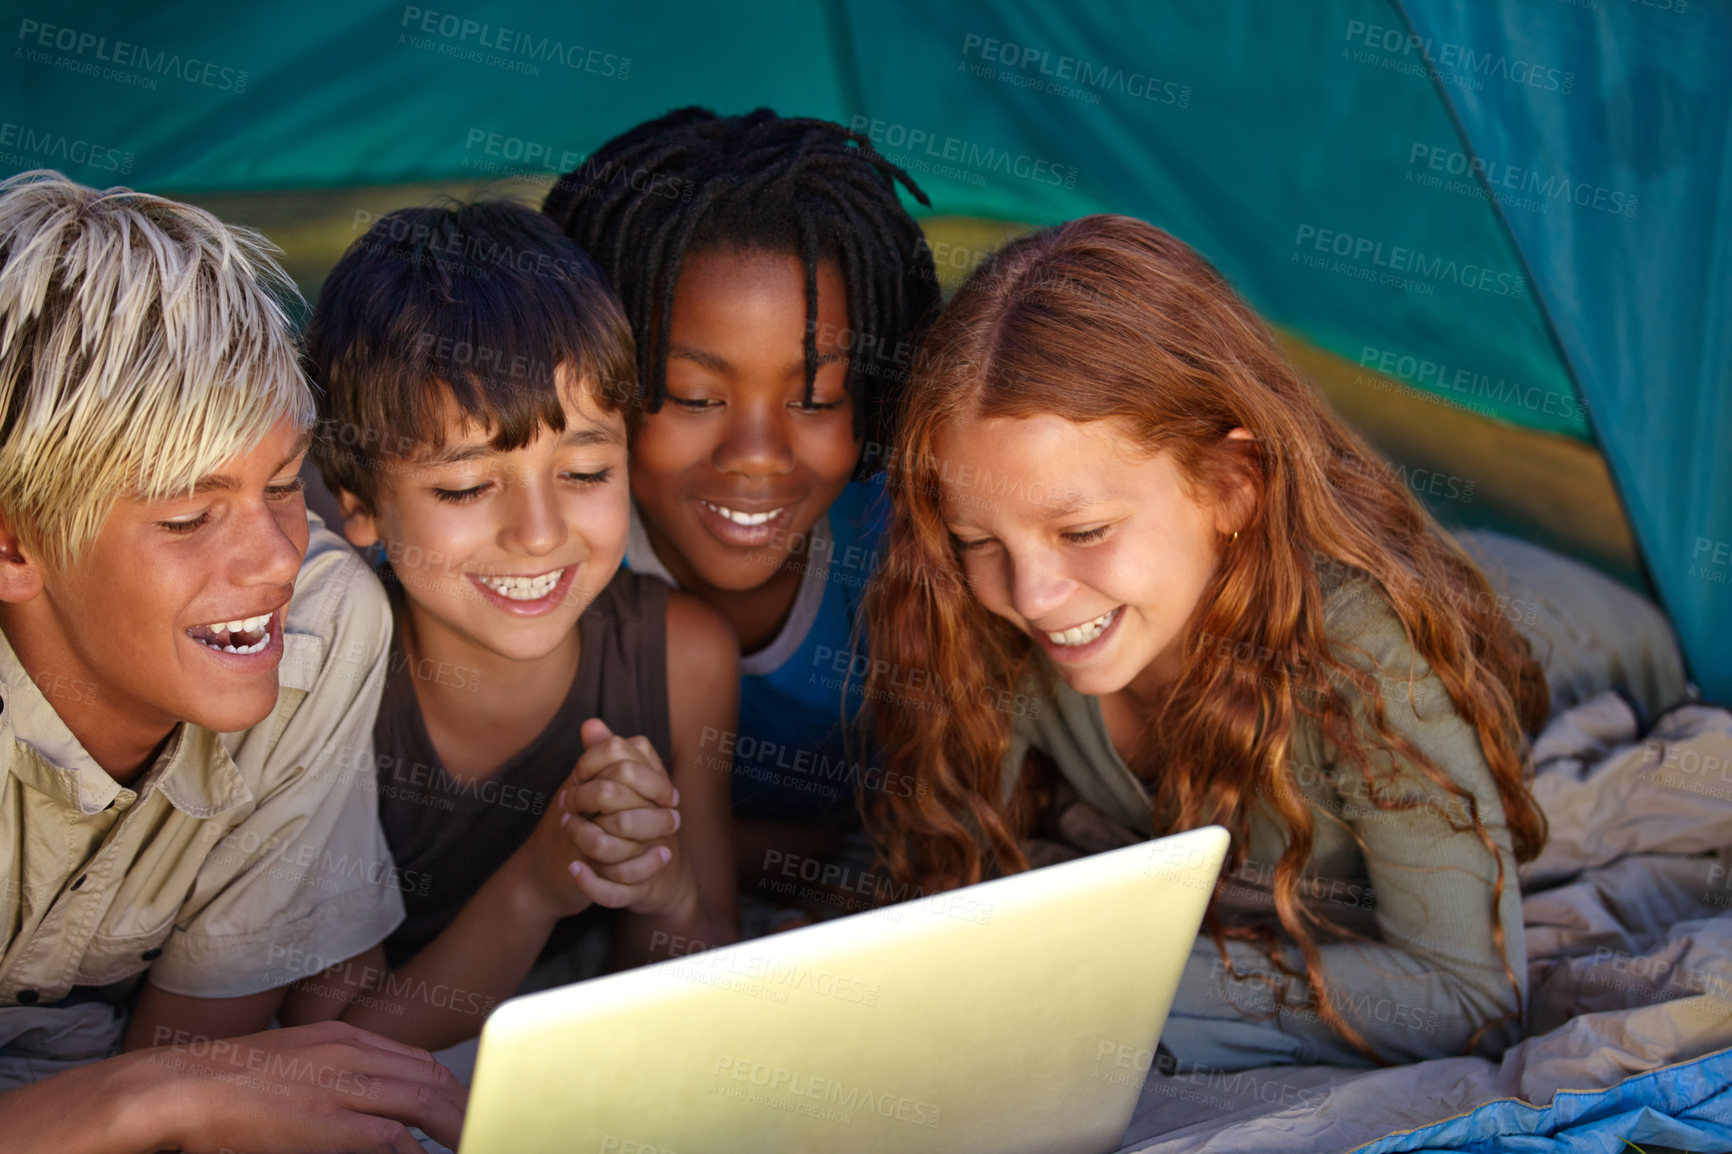 Buy stock photo Laptop, happy and children in tent for camp watching movie, film or show online together. Smile, technology and young kids bonding, relax and streaming video on internet with laptop on weekend trip.